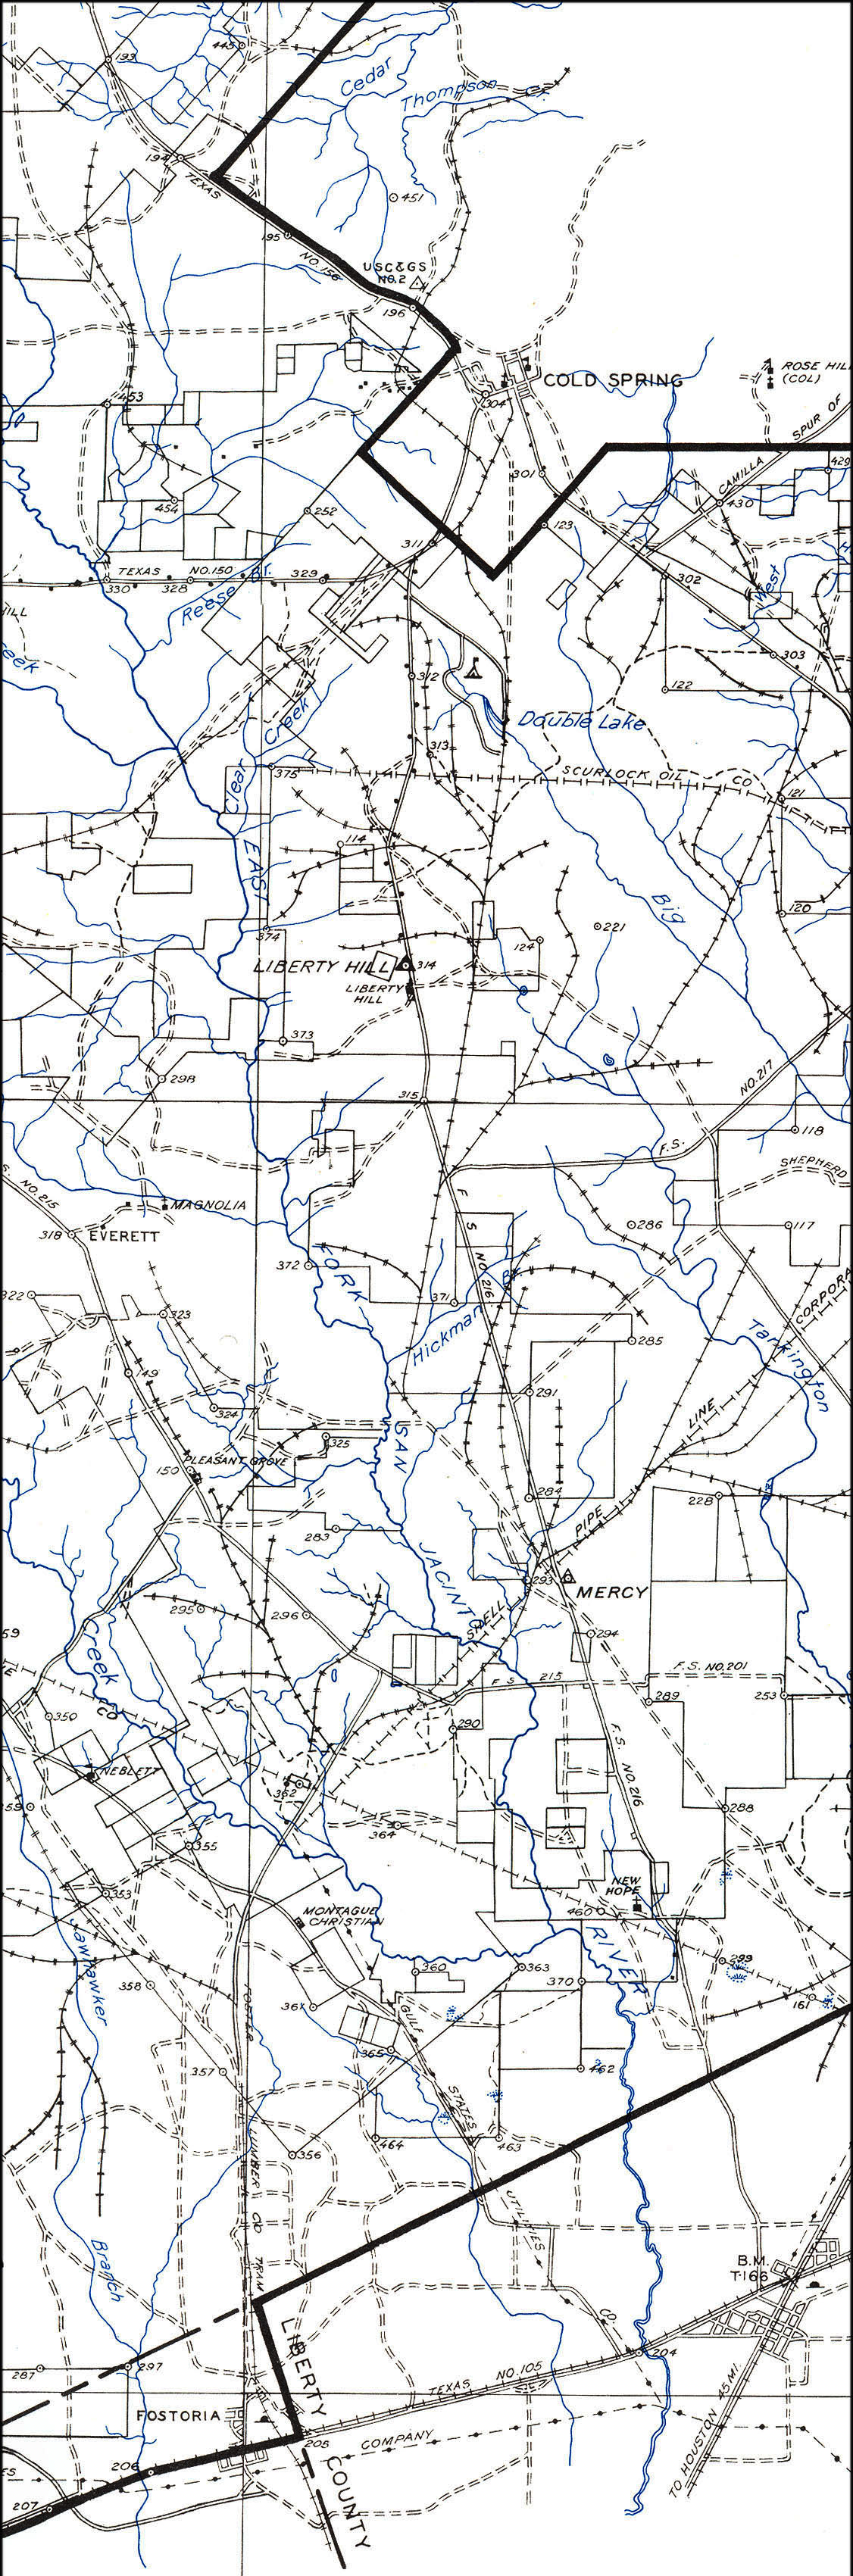 Foster Lumber Company (Tex., Map Showing Trams between Fostoria and Coldspring in 1938.